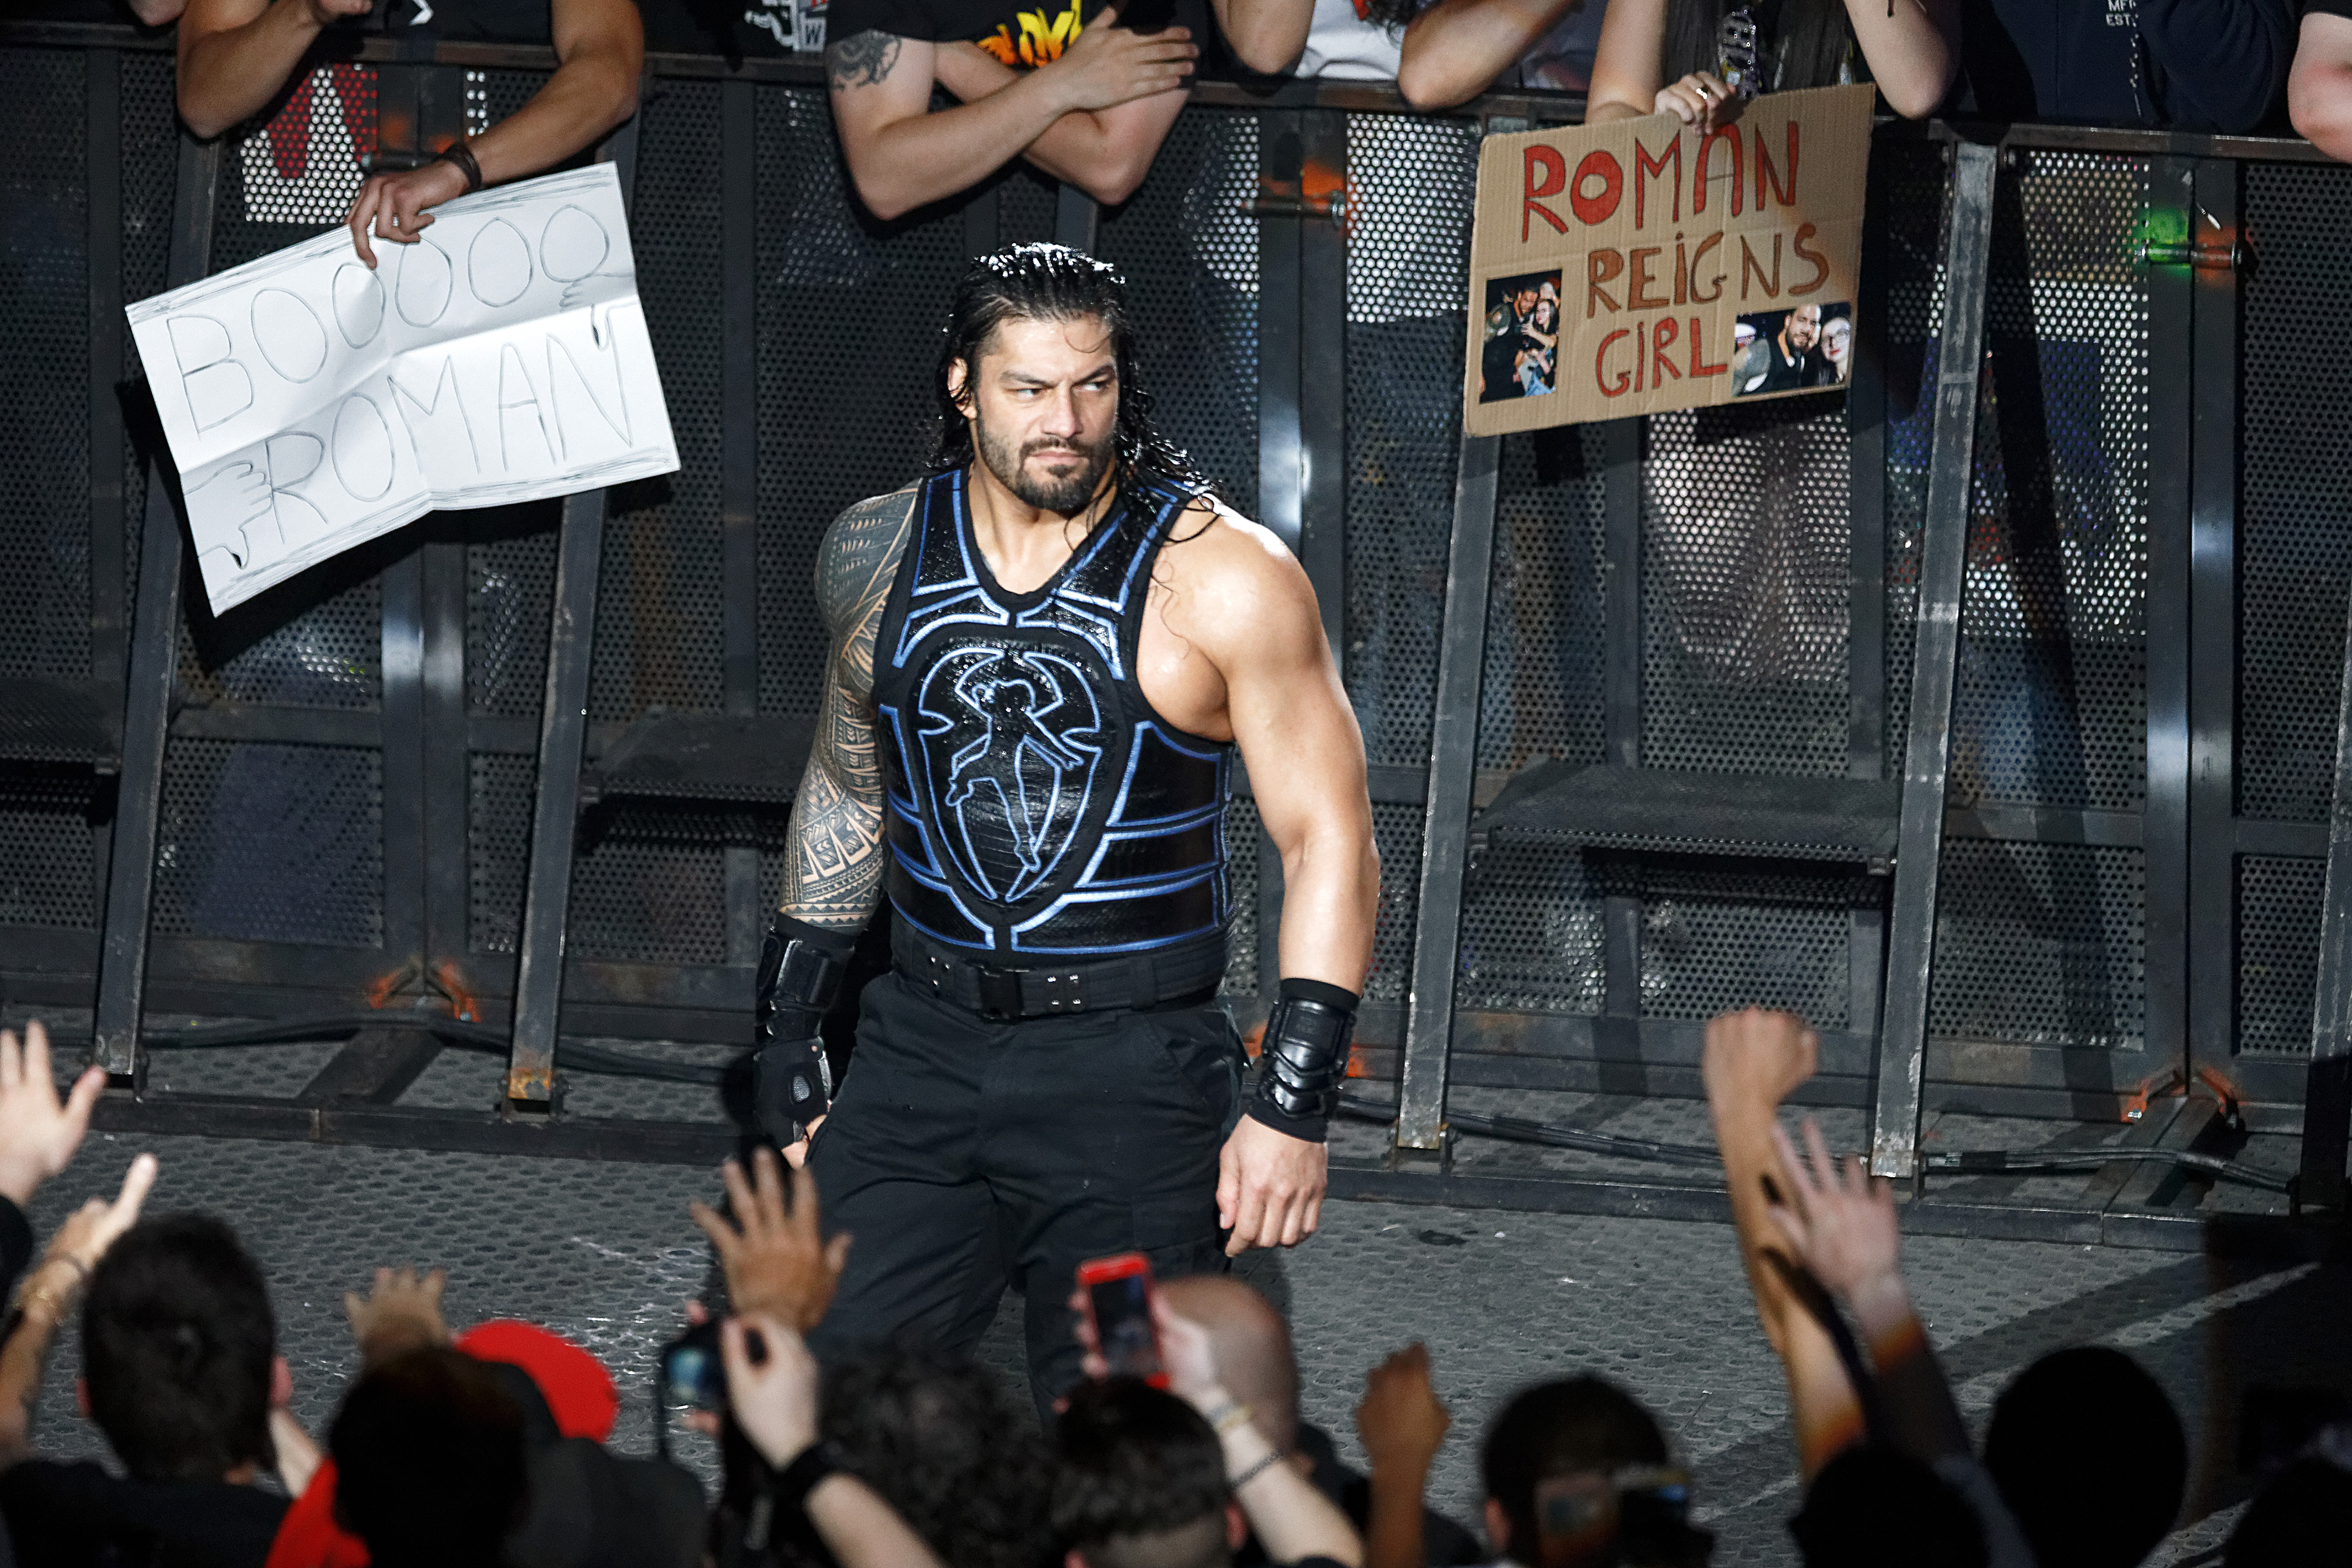 Roman Reigns walks through fans booing and cheering at the WWE Live Paris At Accorhotels Arena In Paris